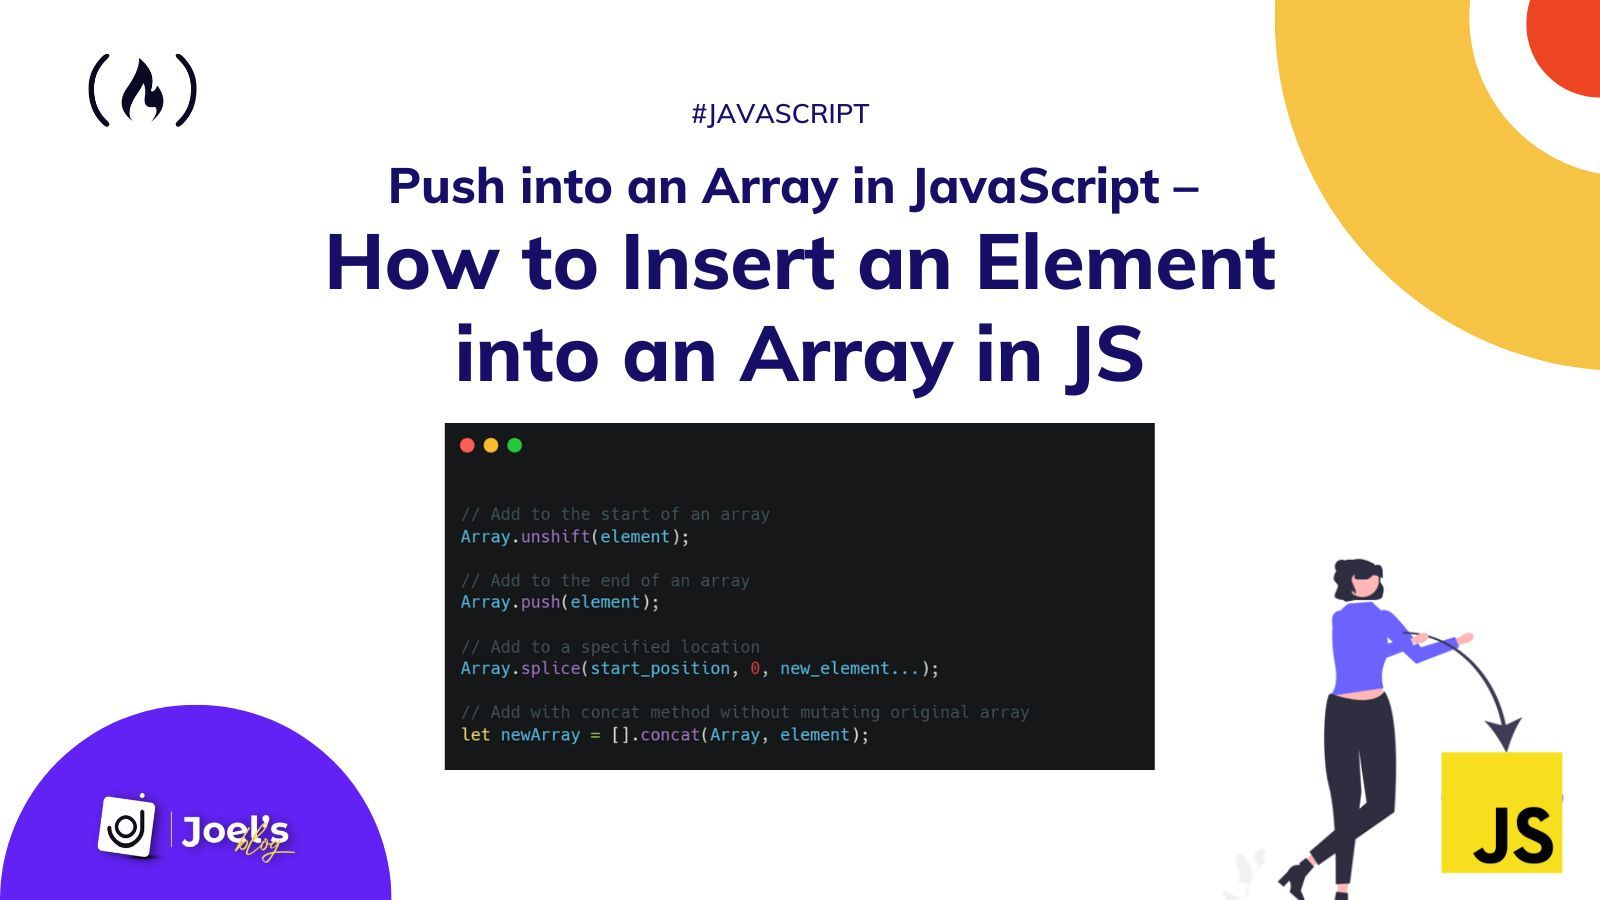 Push into an Array in JavaScript – How to Insert an Element into an Array in JS